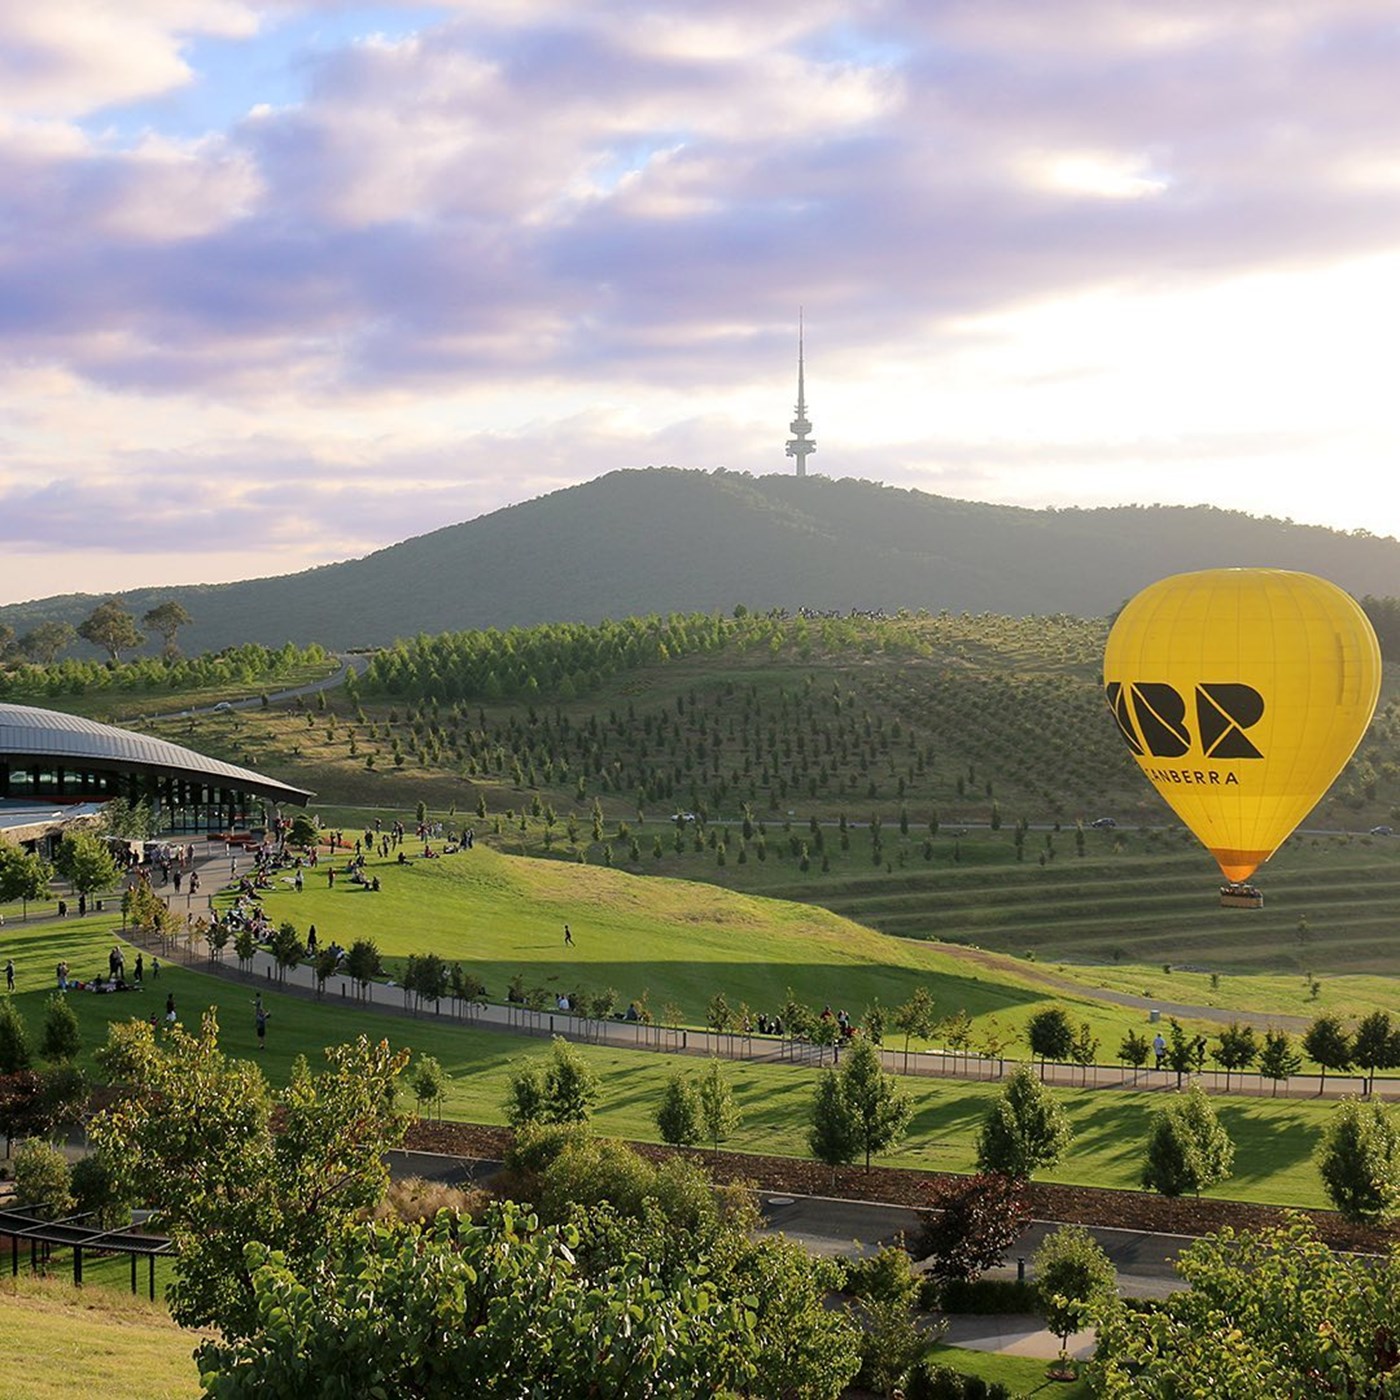 Landscape shot of National Arboretum Canberra Landscape with rolling green hills and a yellow hot air balloon